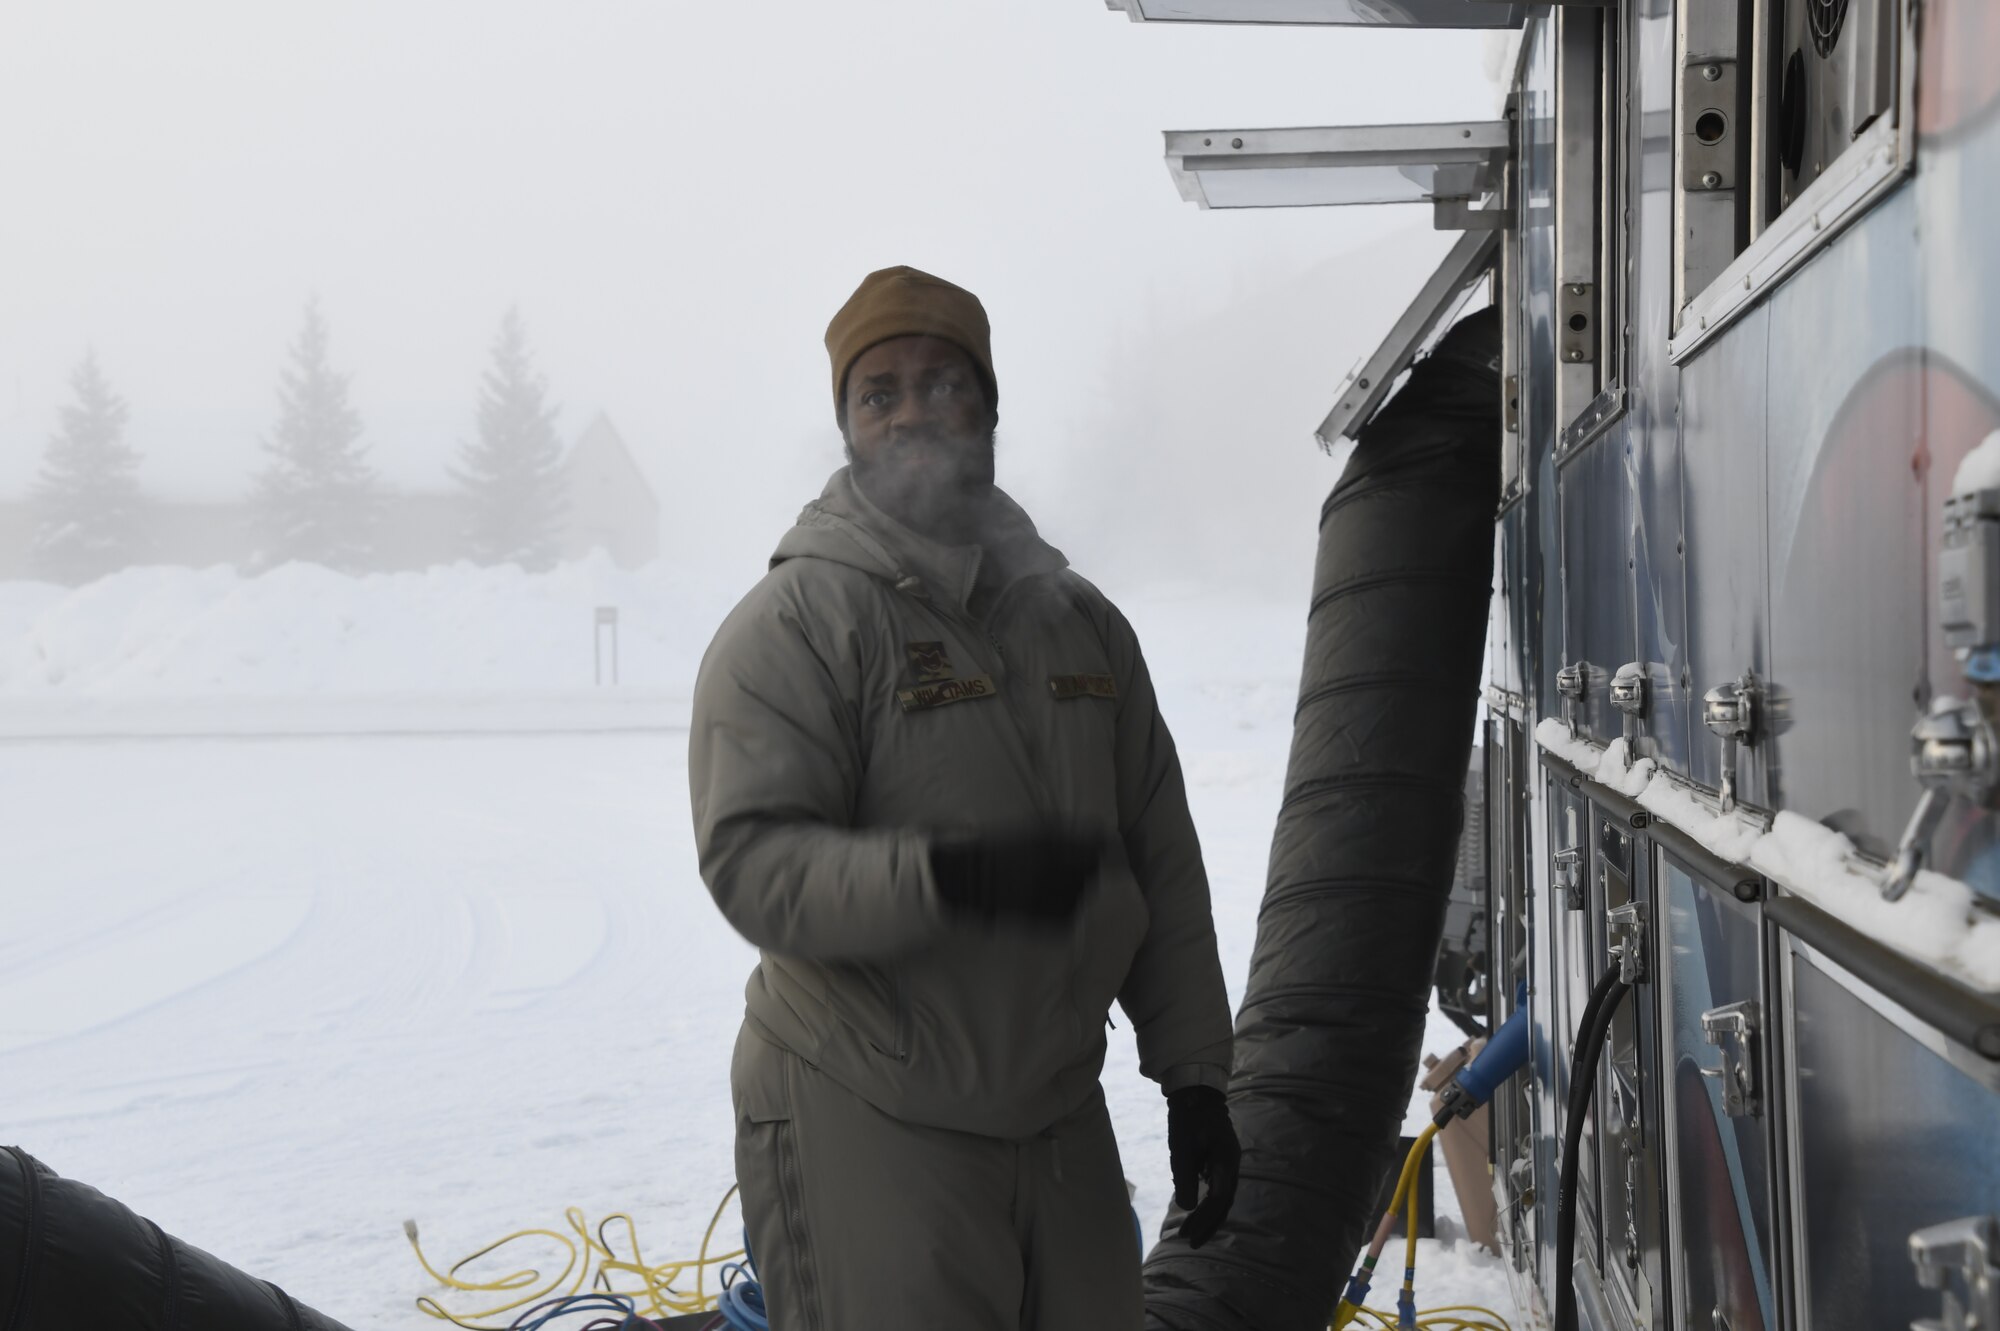 The 168th Services Airmen prepare and test the Disaster Relief Mobile Kitchen trailer in -40 degree temperatures.